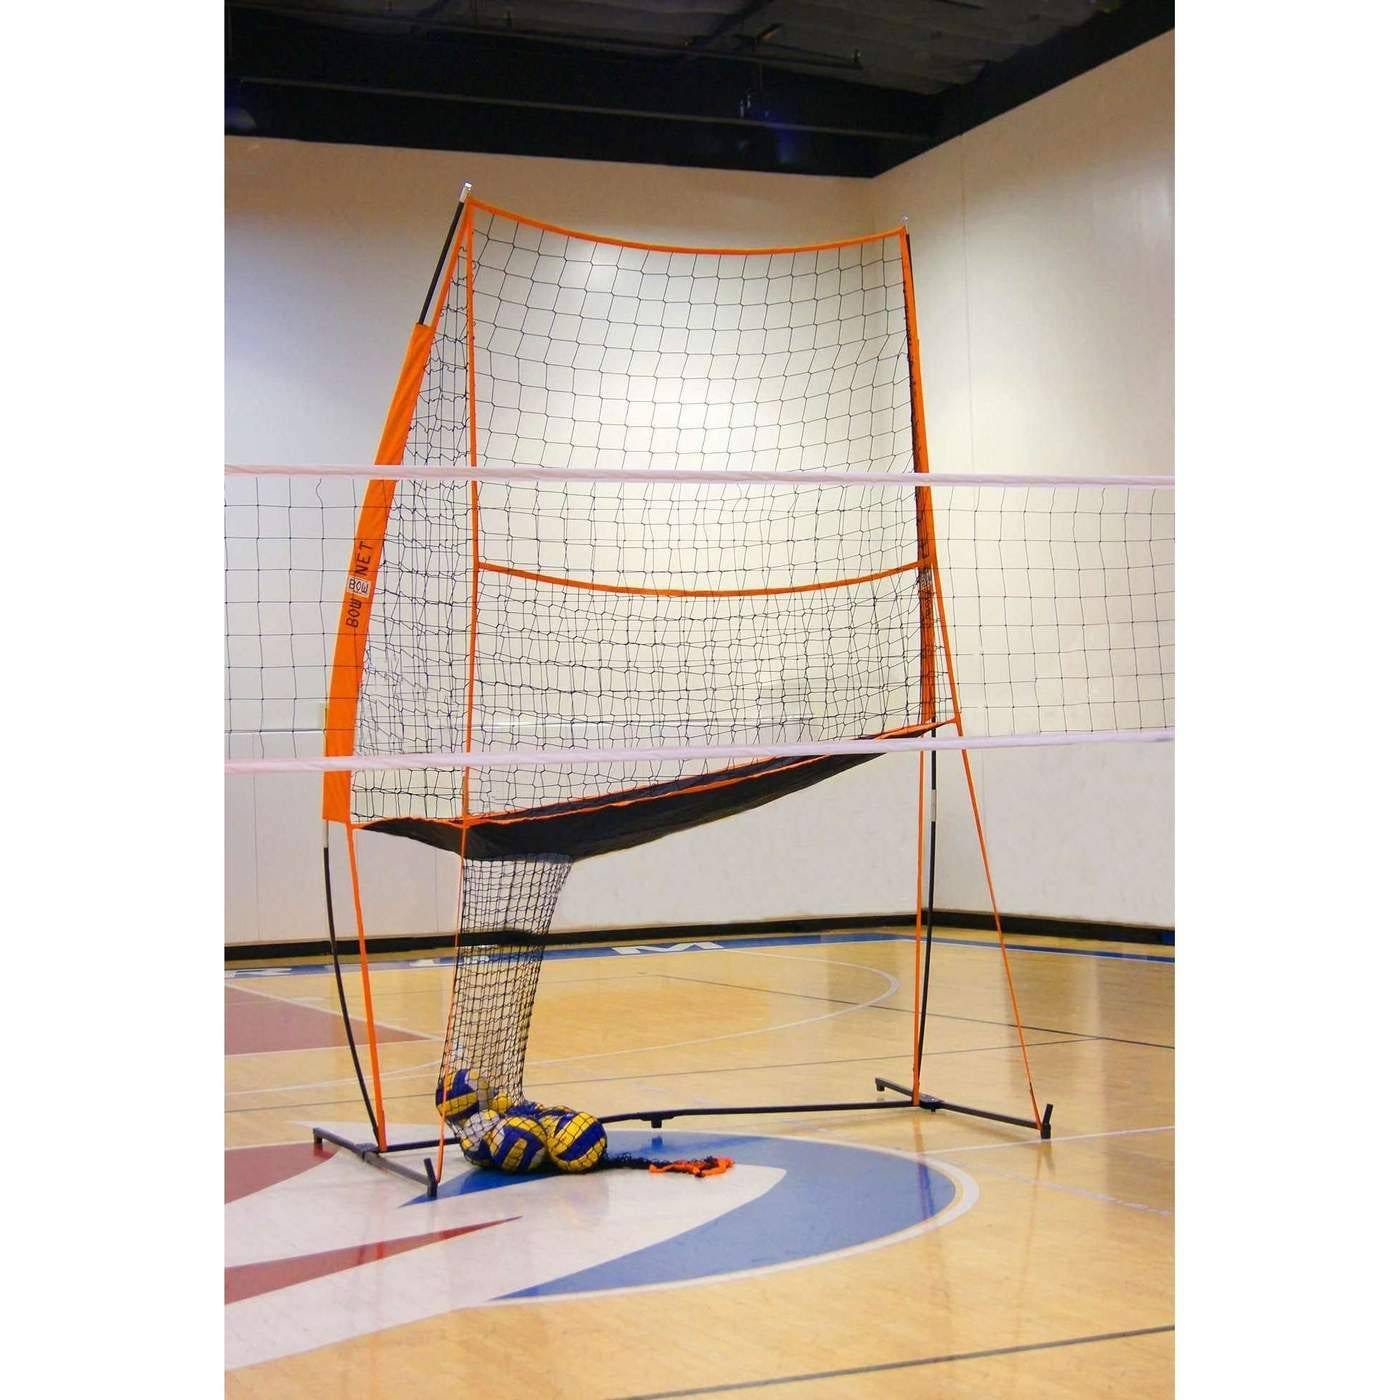 Bownet Volleyball Practice Station: Ideal for Perfecting Your Game | Image